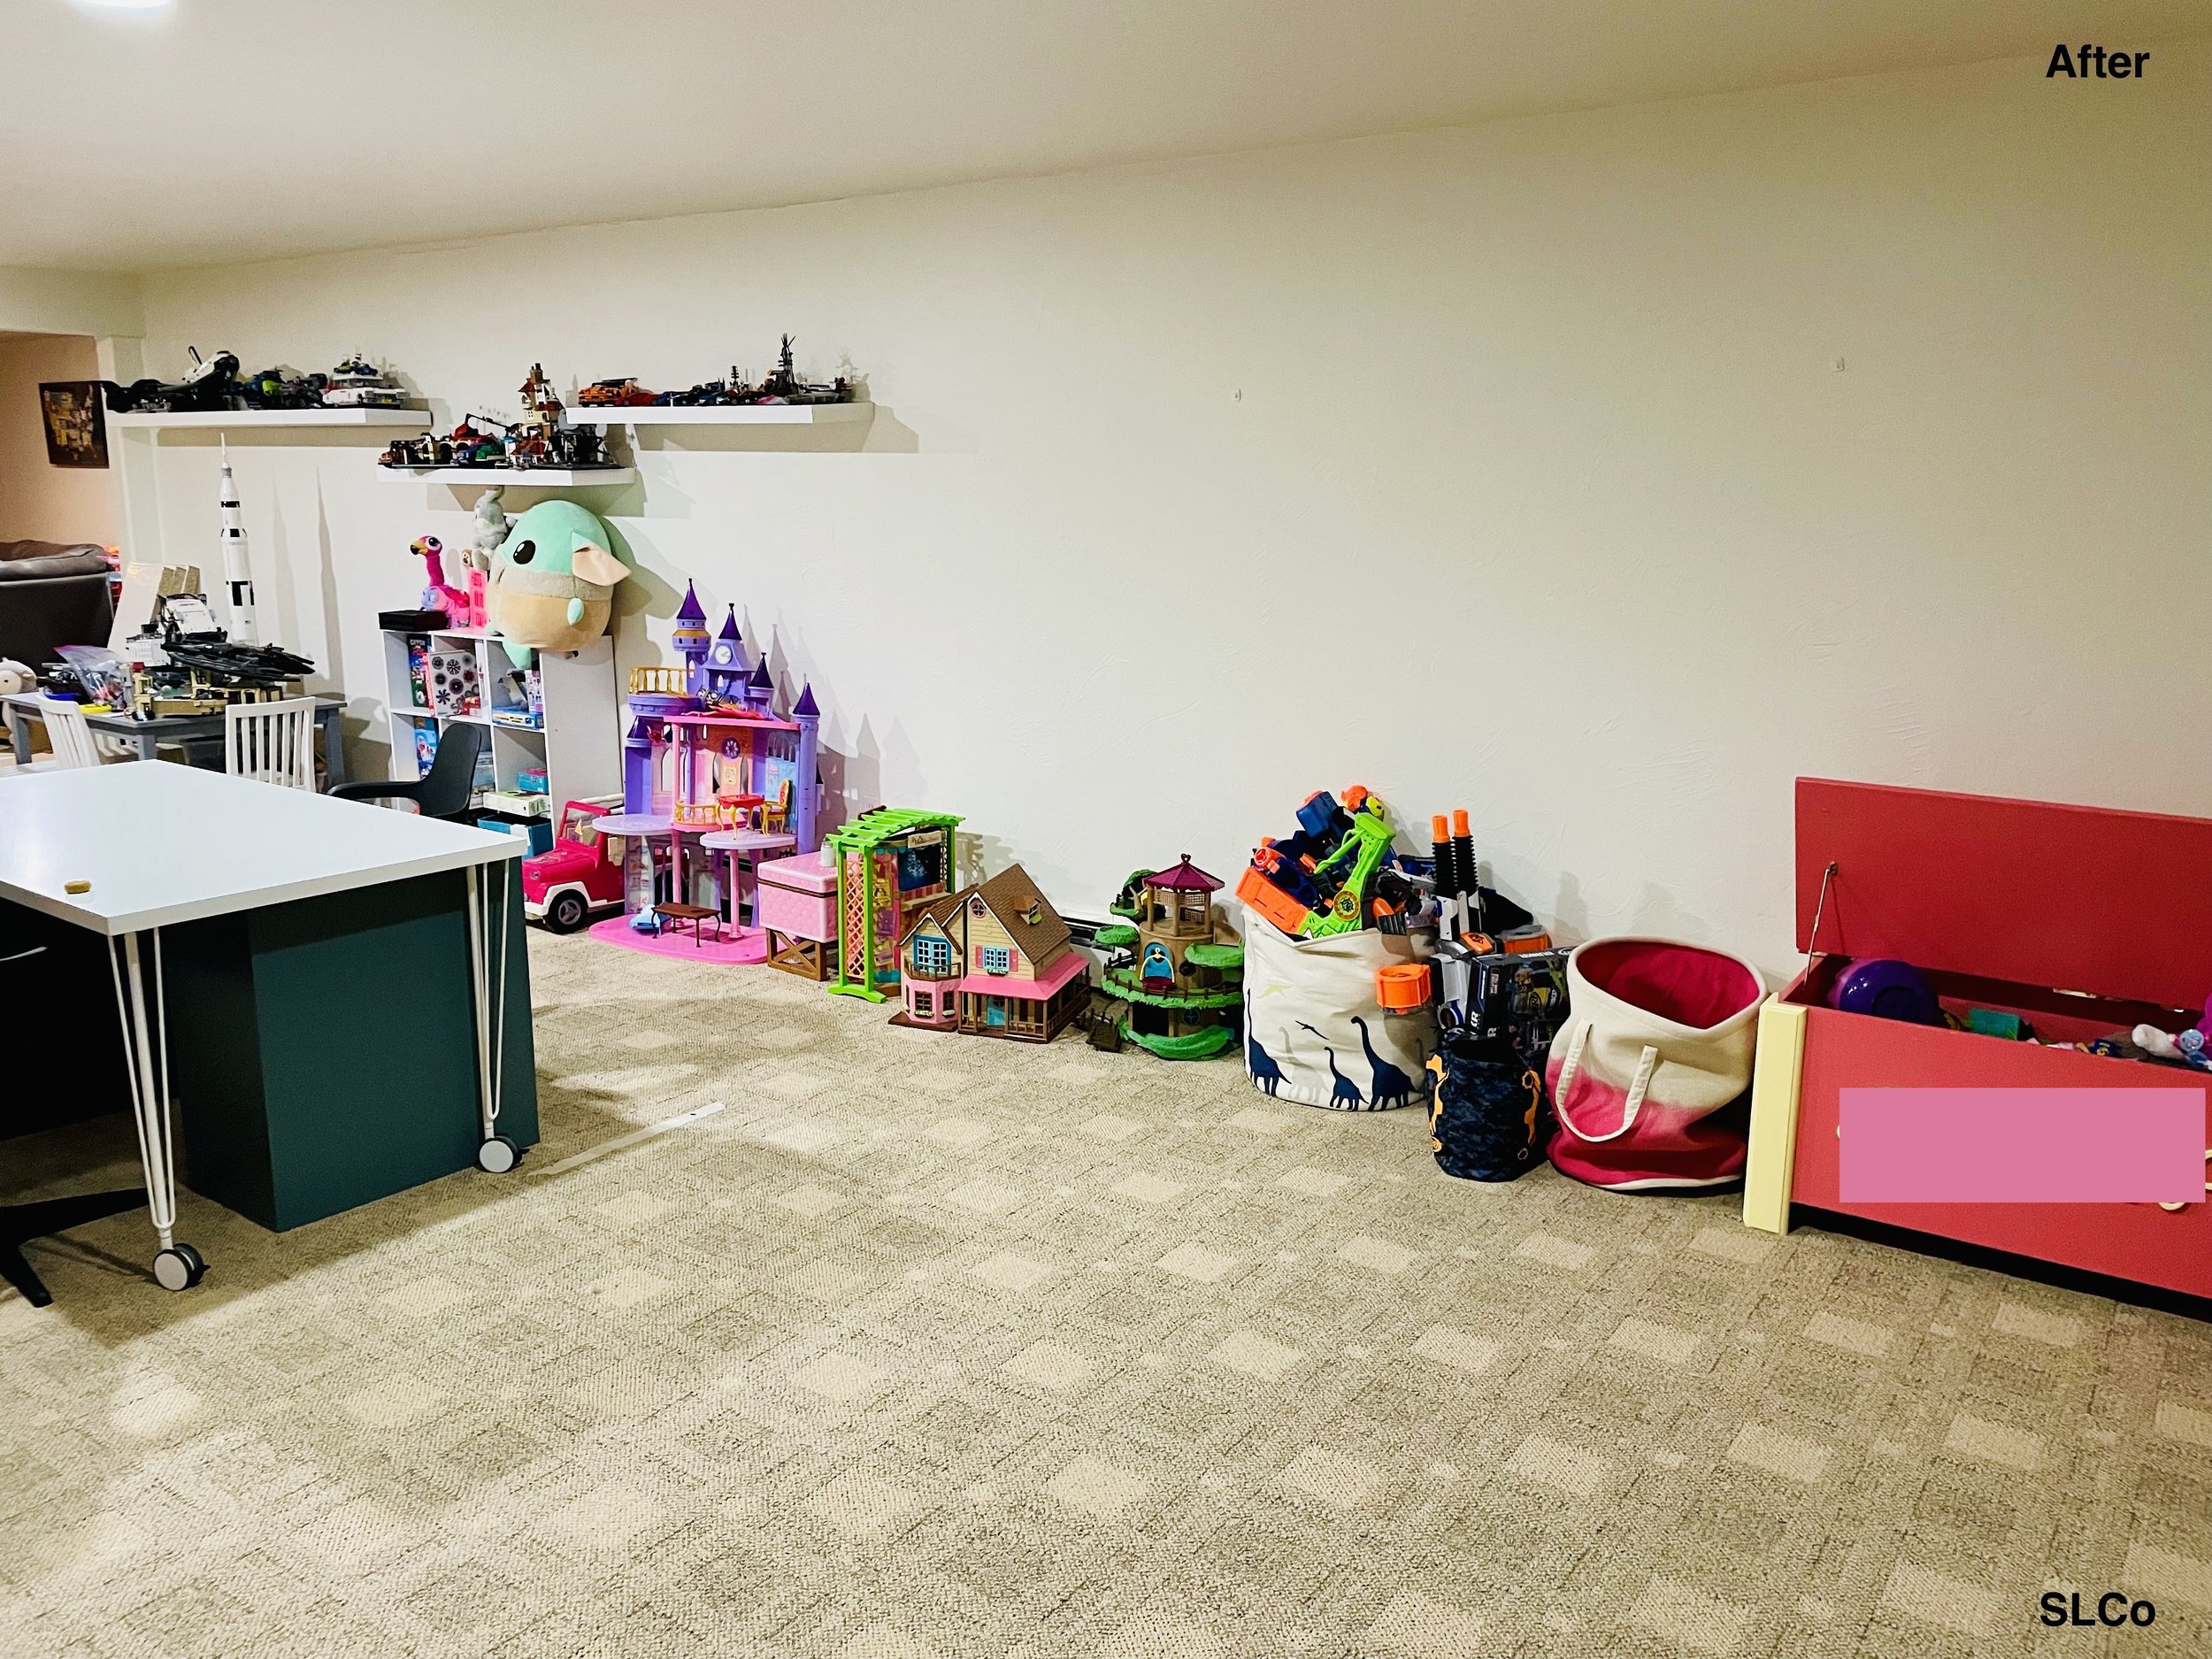 Large basement with floor clear, play table in the middle and toys lines against wall.